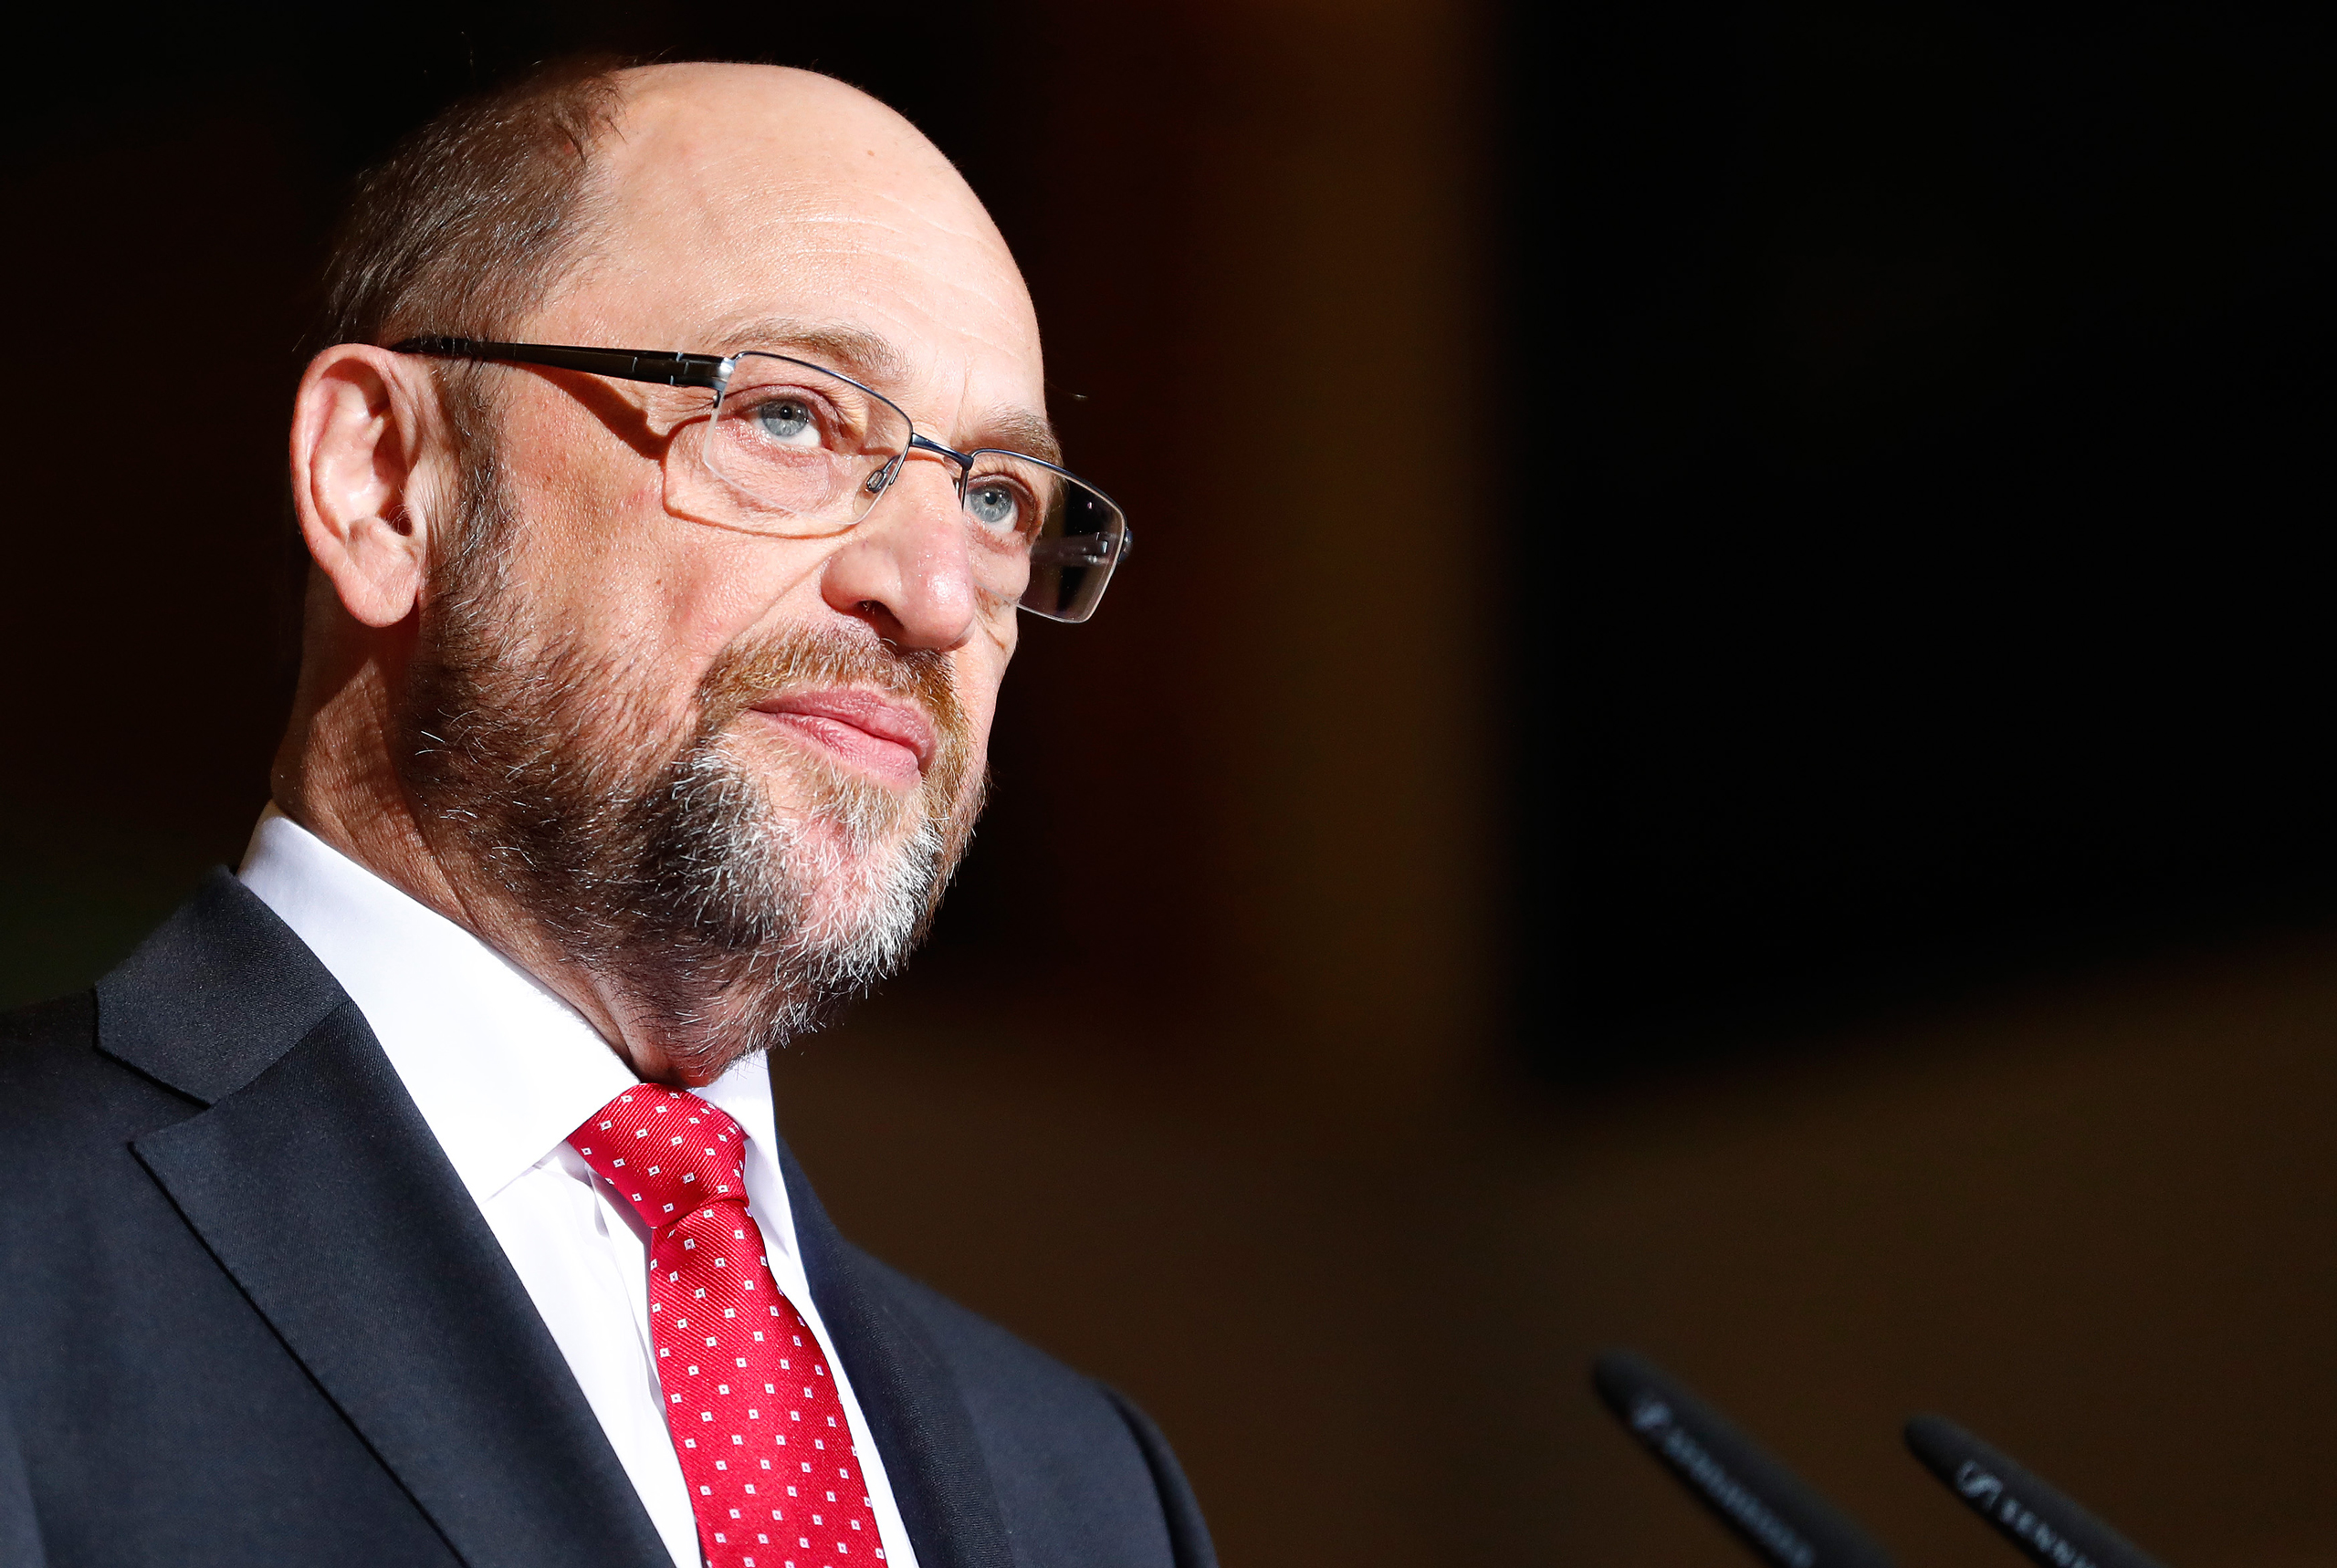 Former president of the European Parliament Schulz looks on during a news conference in Berlin